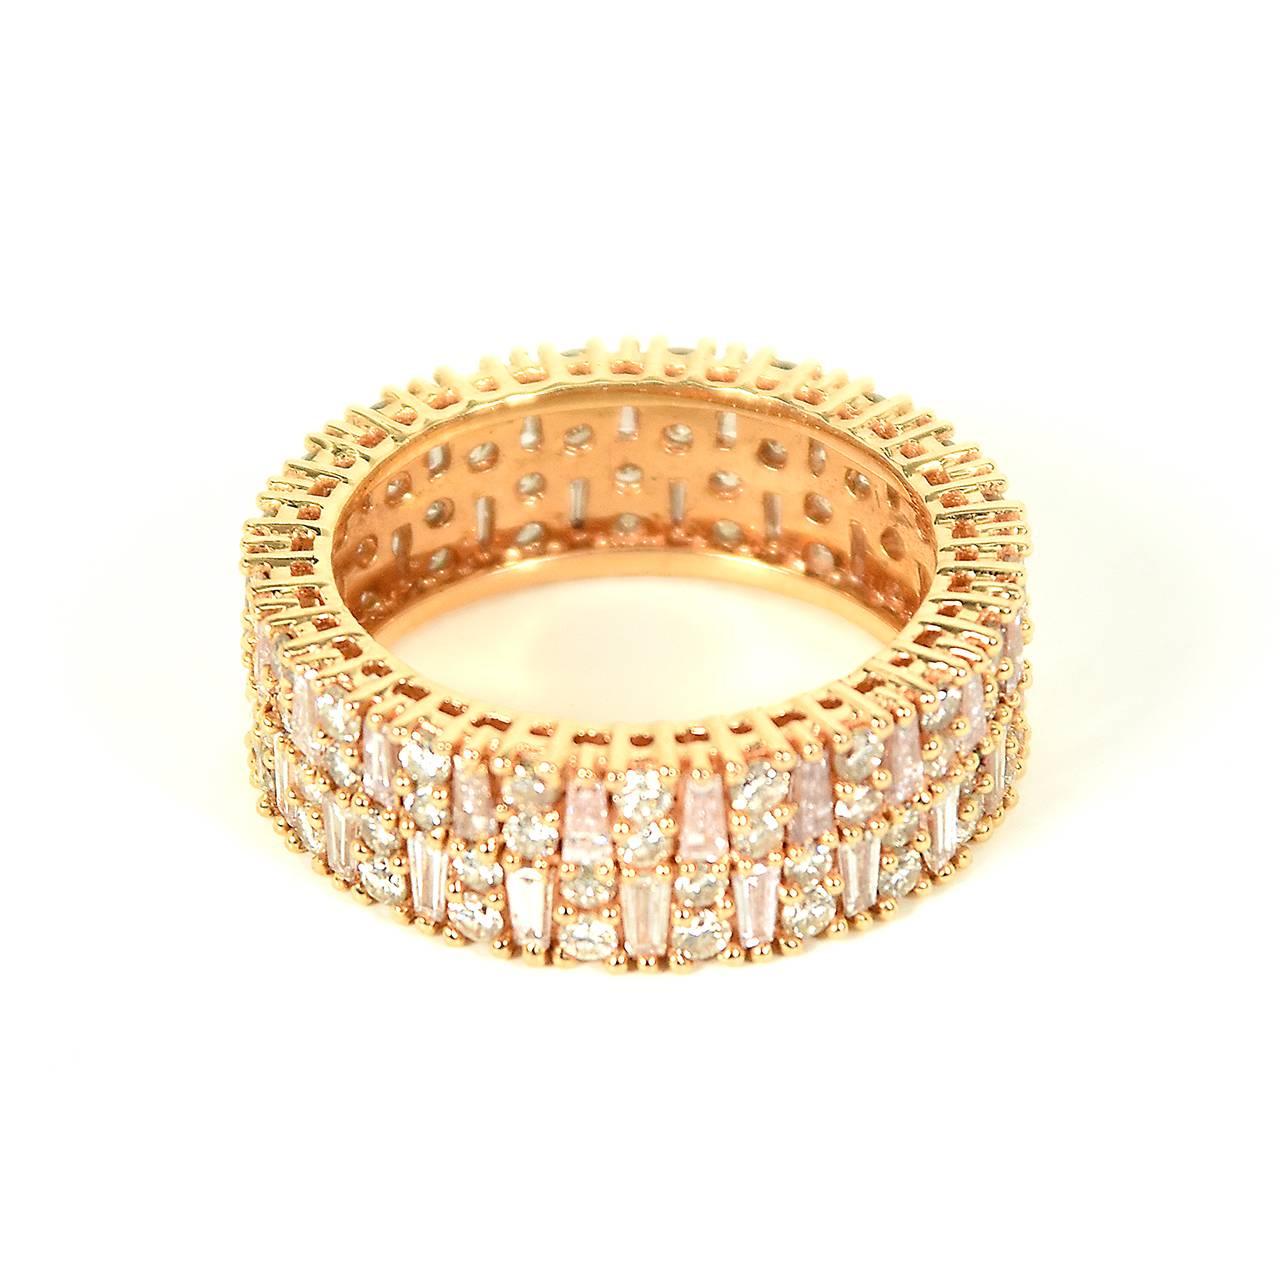 18ct rose gold eternity ring, diamond-set full circle band, individually micro-claw set with a total of 42 tapered baguette diamonds of a faint blush pink hue, alternating with sets of two brilliant cut diamond in a staggered pattern around the